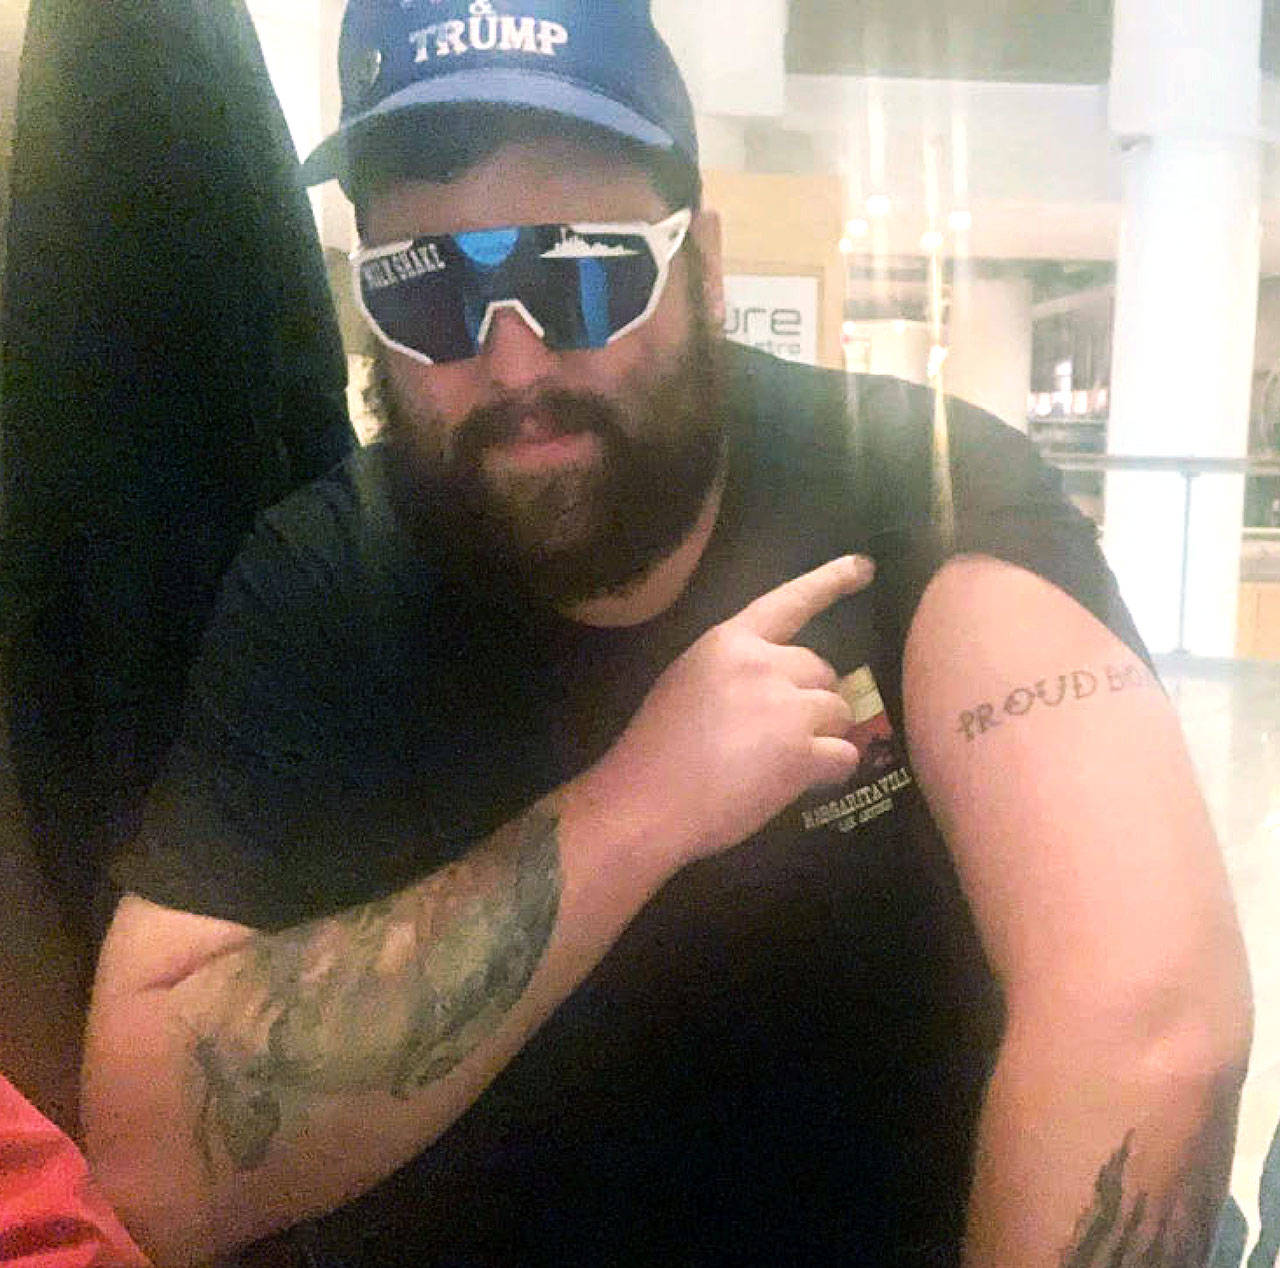 Daniel Scott, displaying a “Proud Boys” tattoo, in a photo from federal charging papers. (FBI)